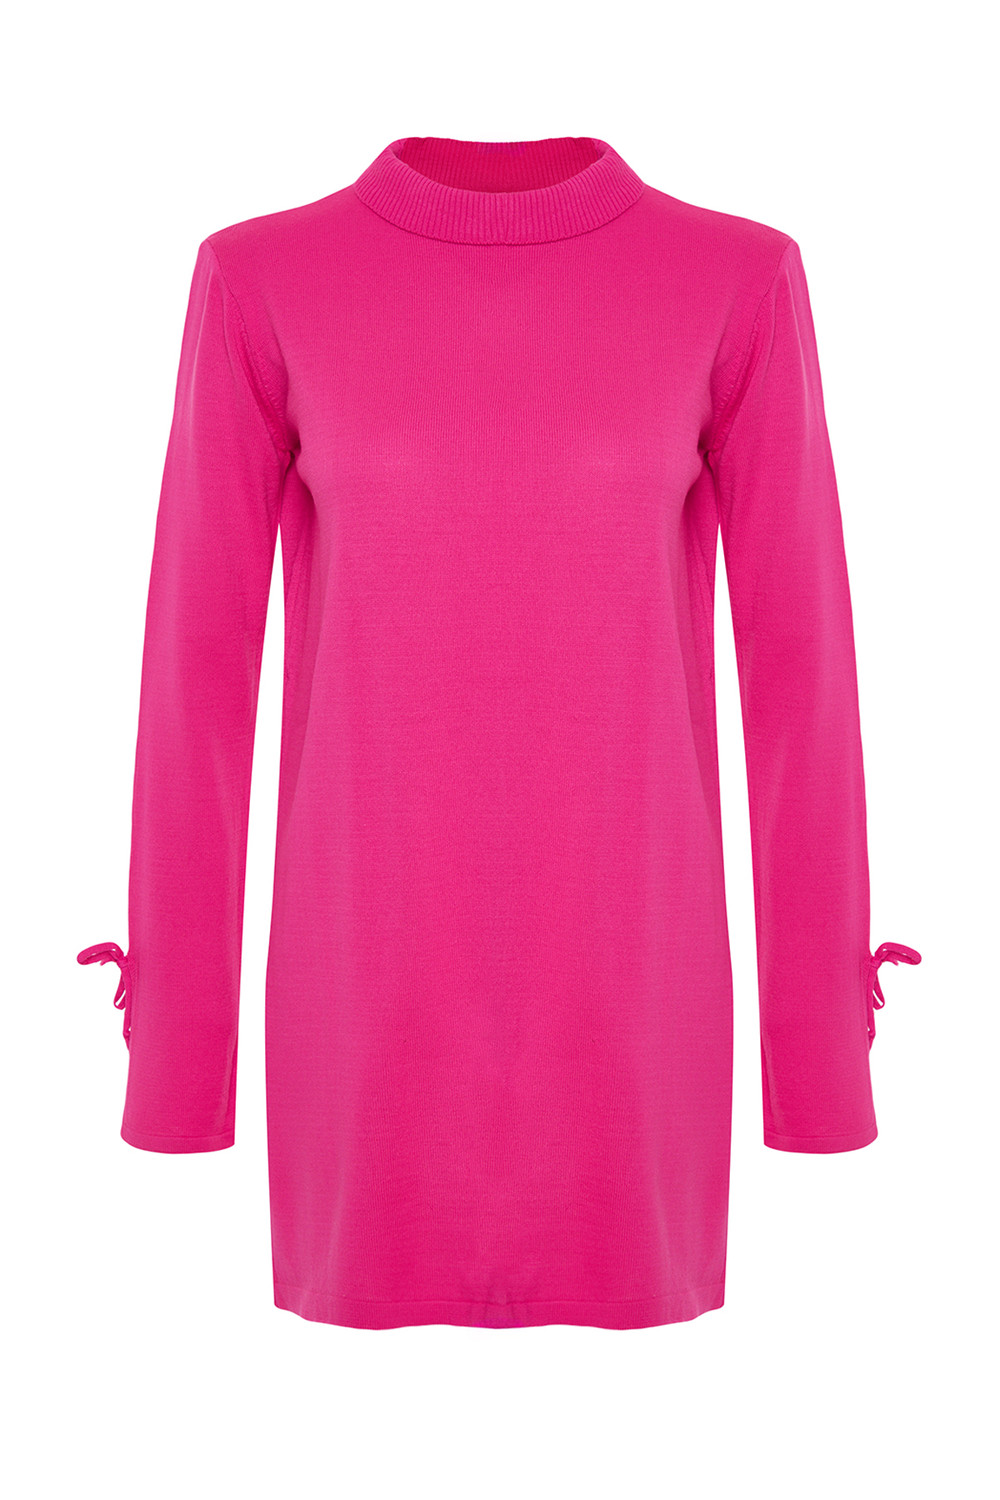 Trendyol Pink Stand-Up Collar Knitwear Sweater with Binding Detailed Sleeves